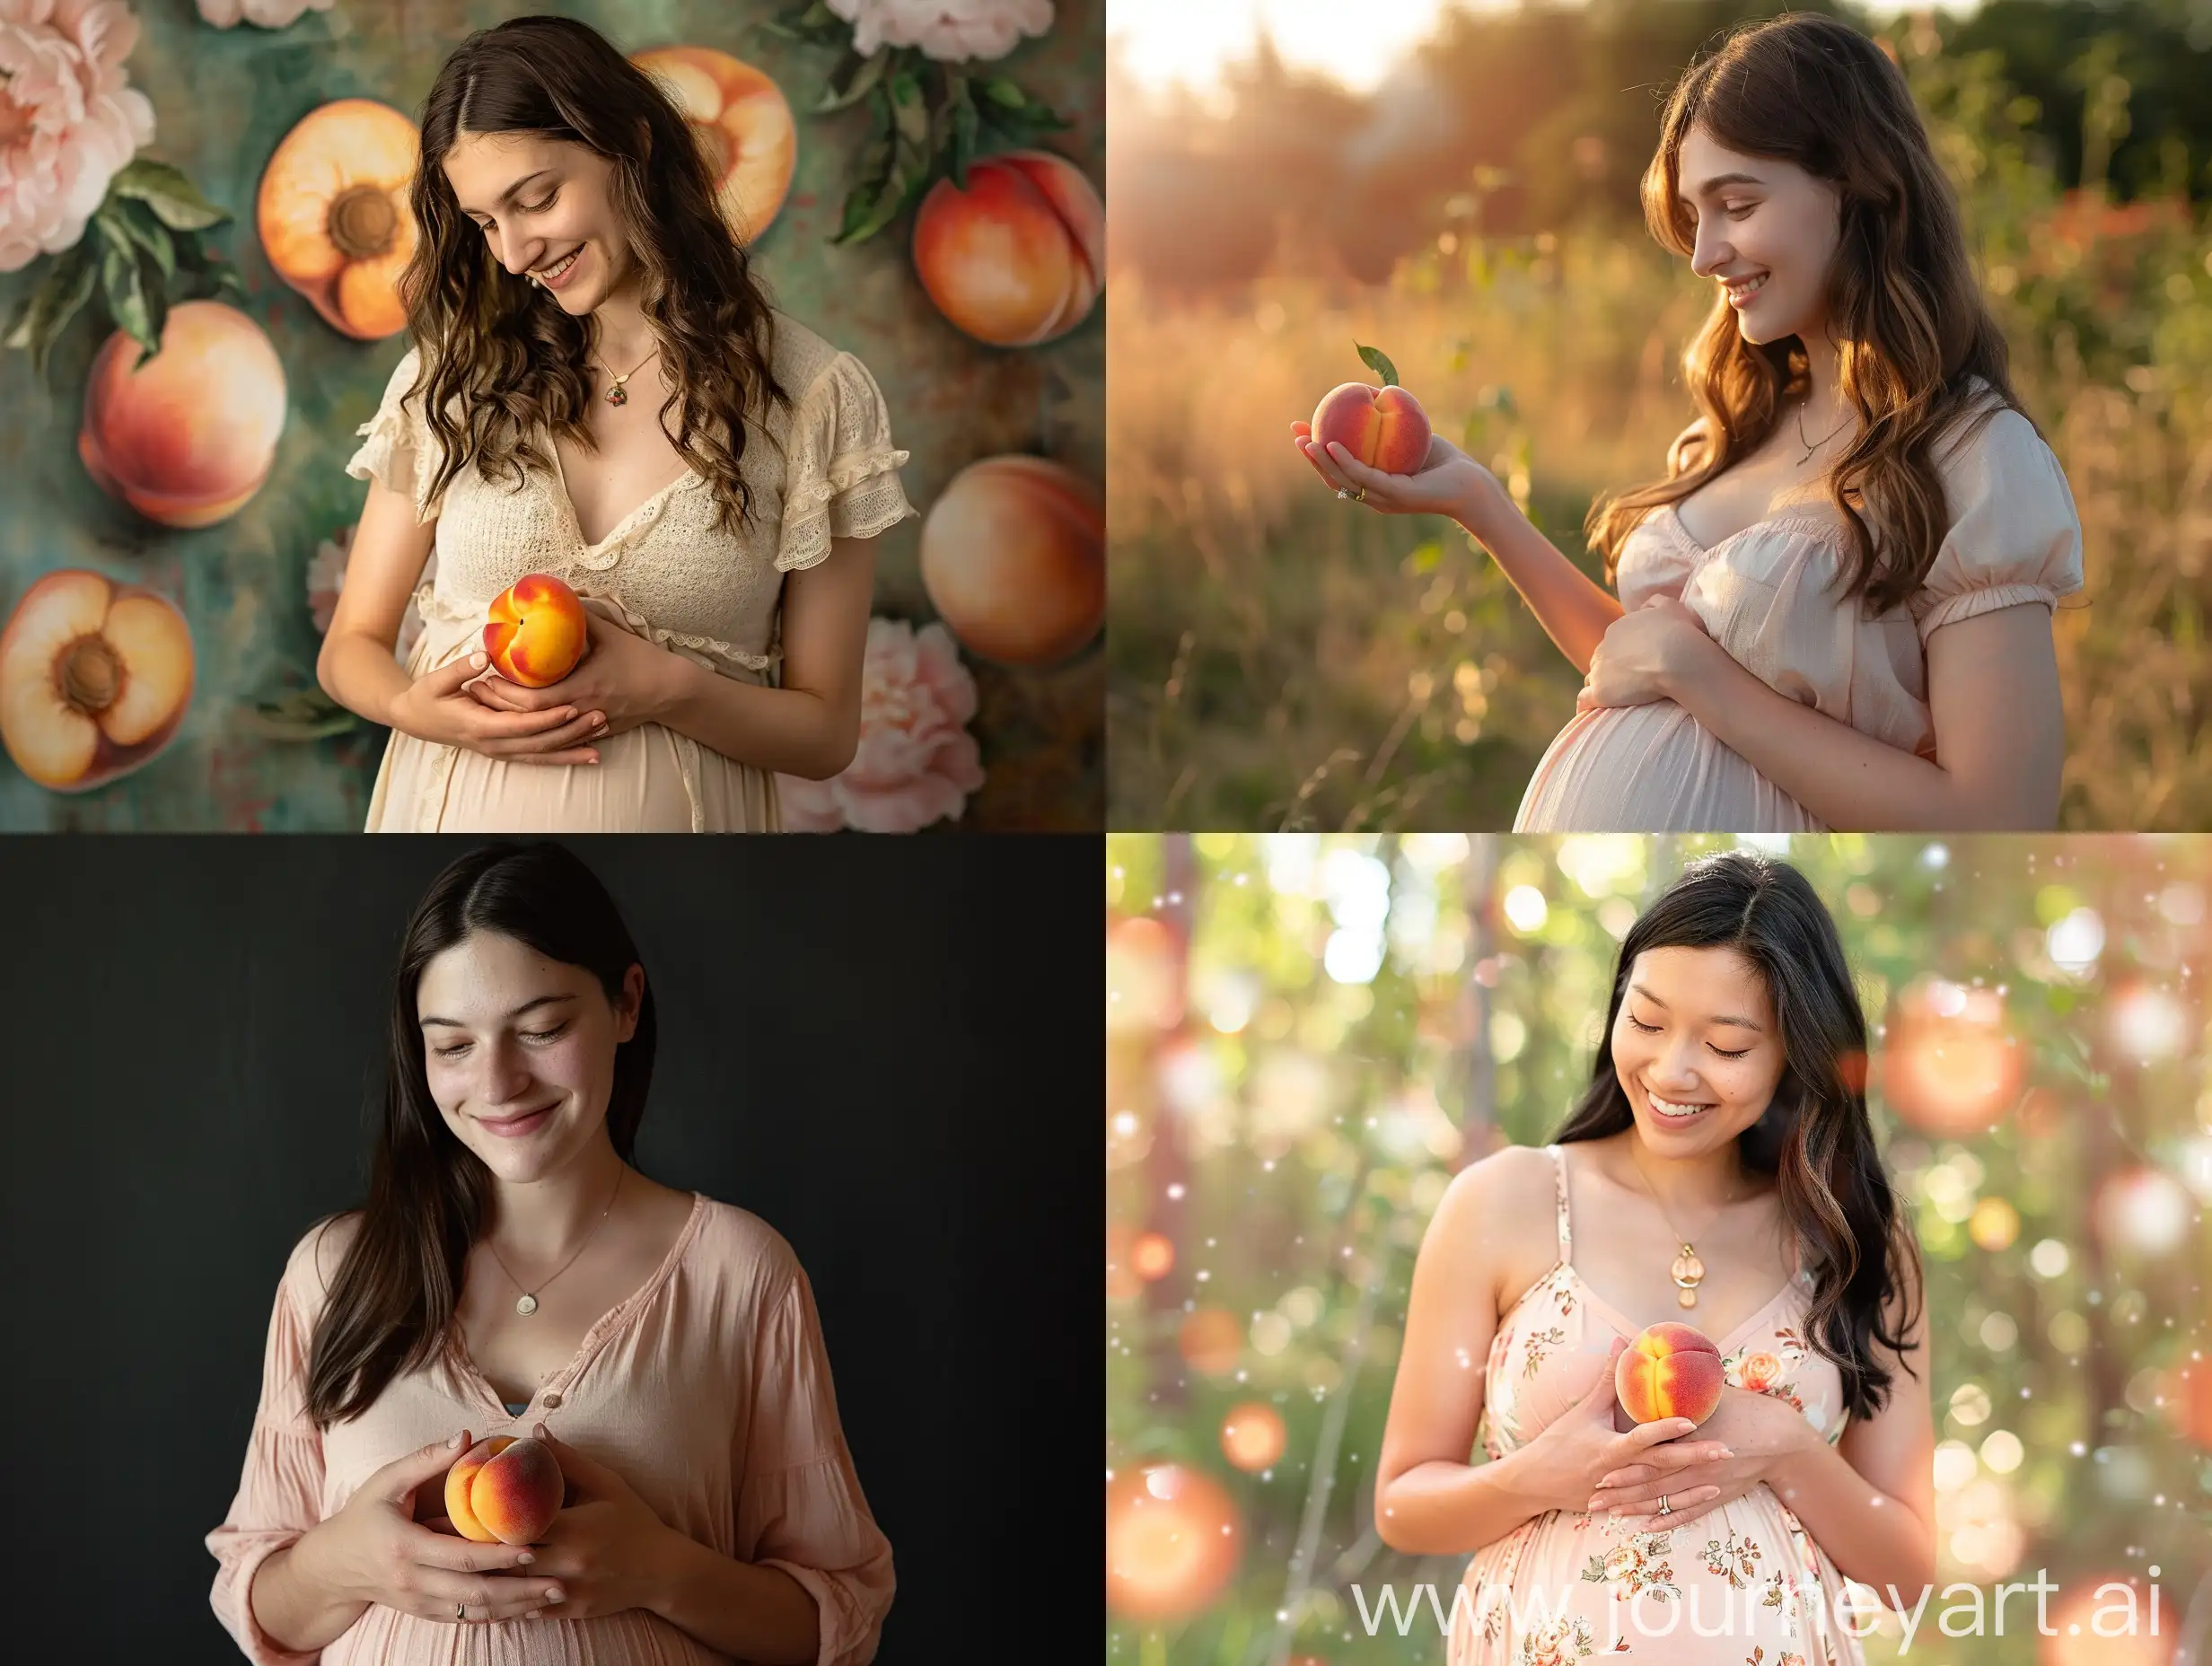 Pregnant-Woman-Holding-Peach-Expectant-Mother-with-Fresh-Fruit